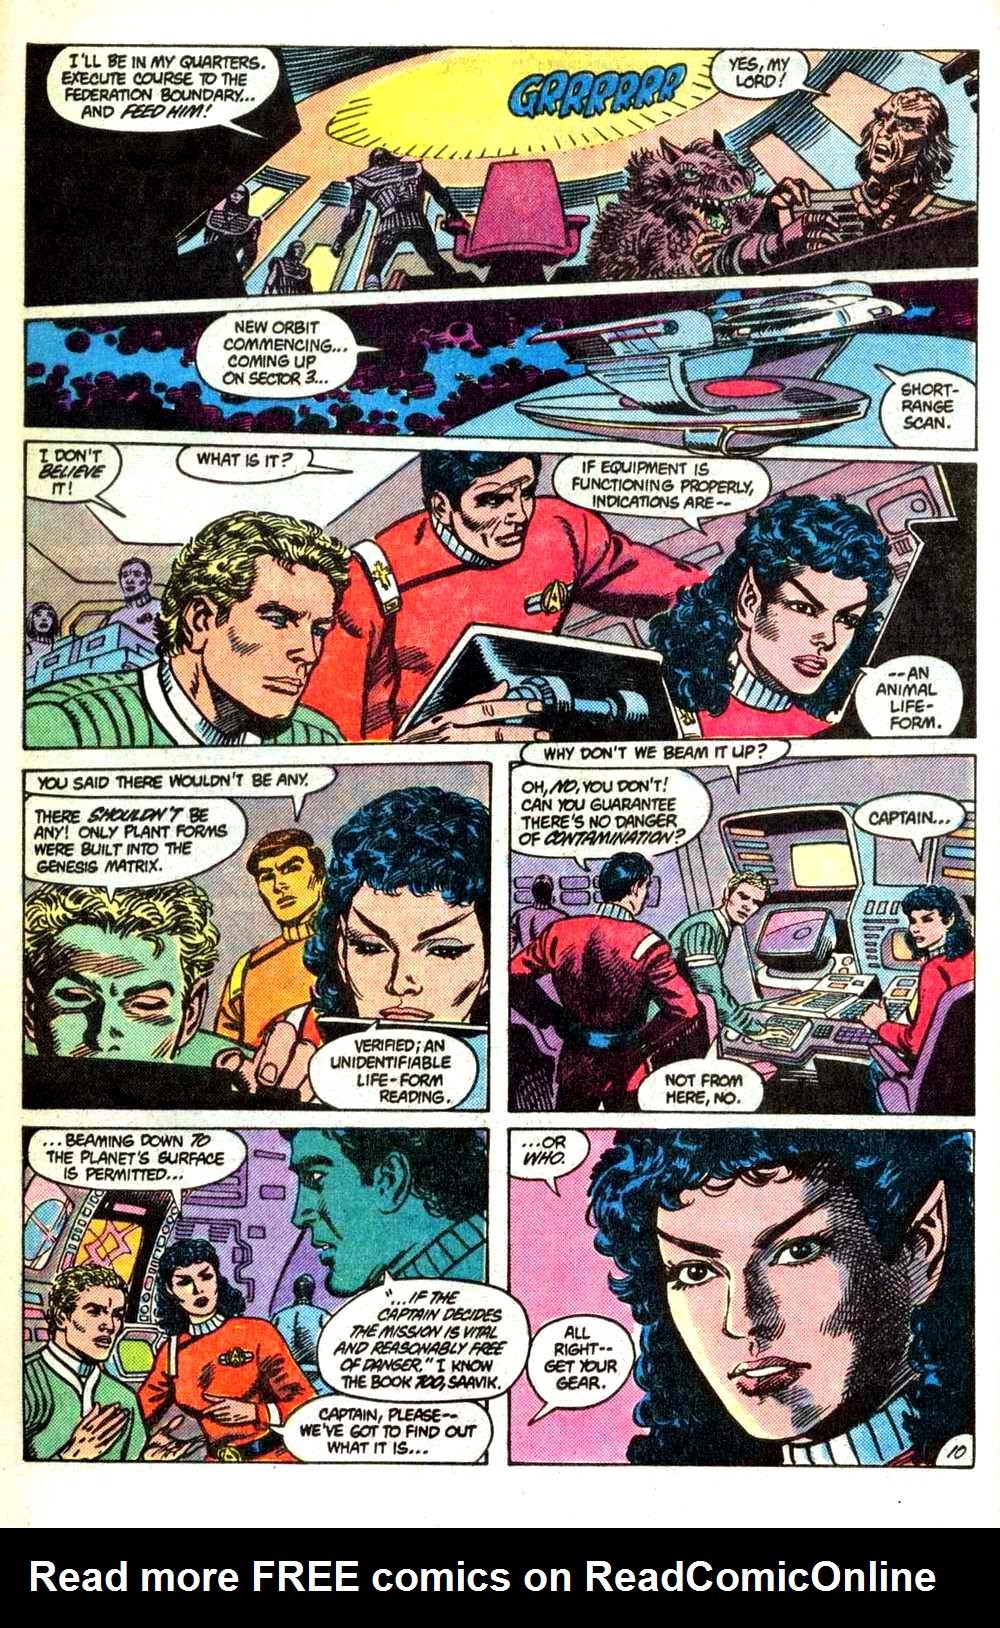 Read online Star Trek III: The Search for Spock comic -  Issue # Full - 12